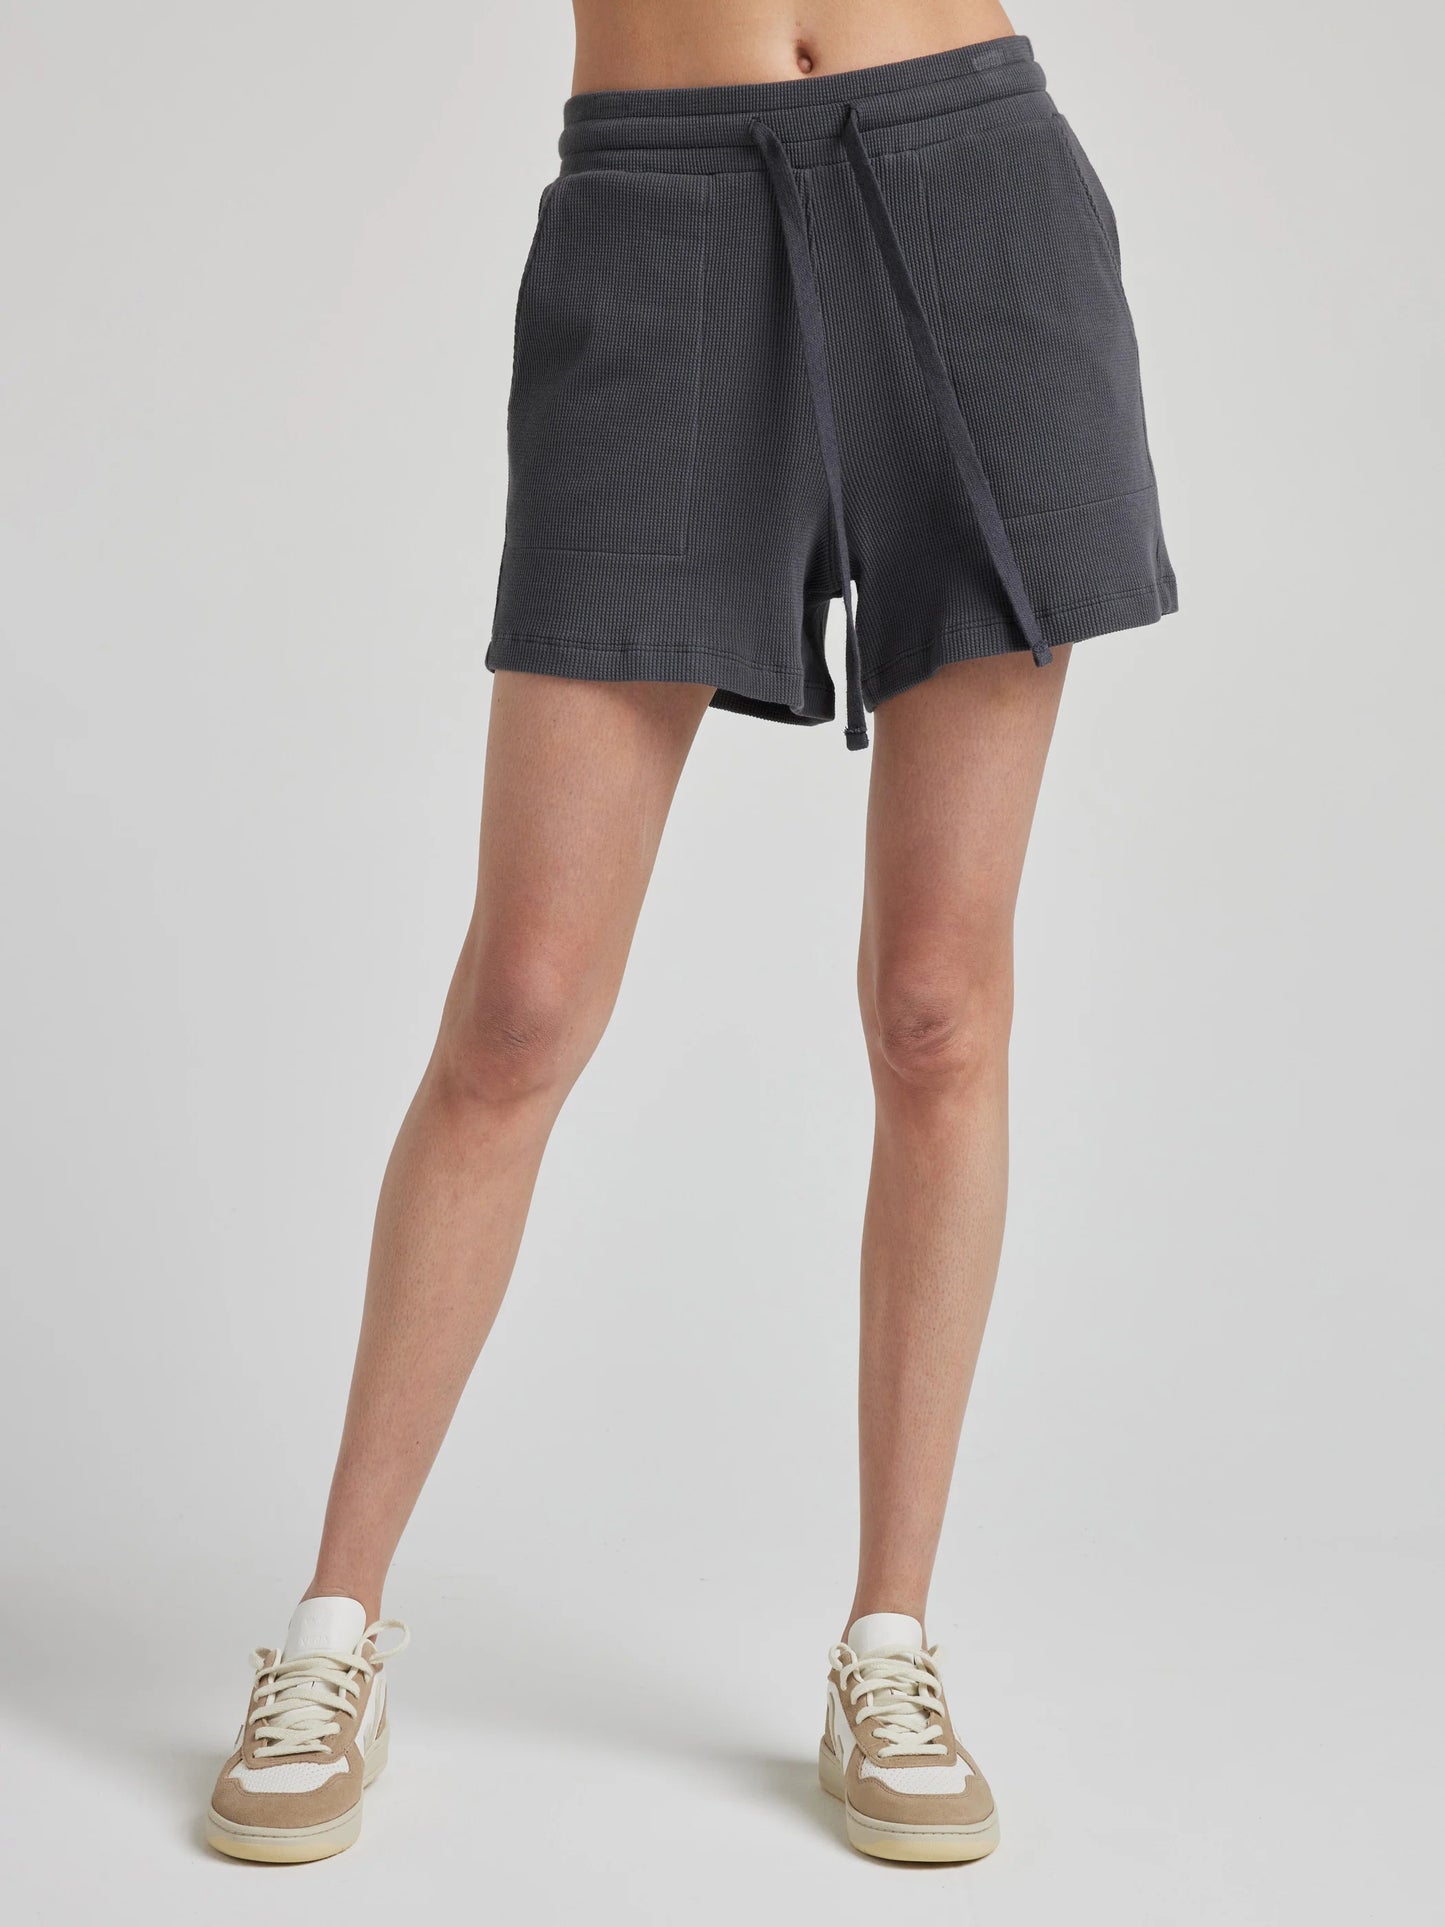 Eco-Comb Drawstring Short in Charcoal